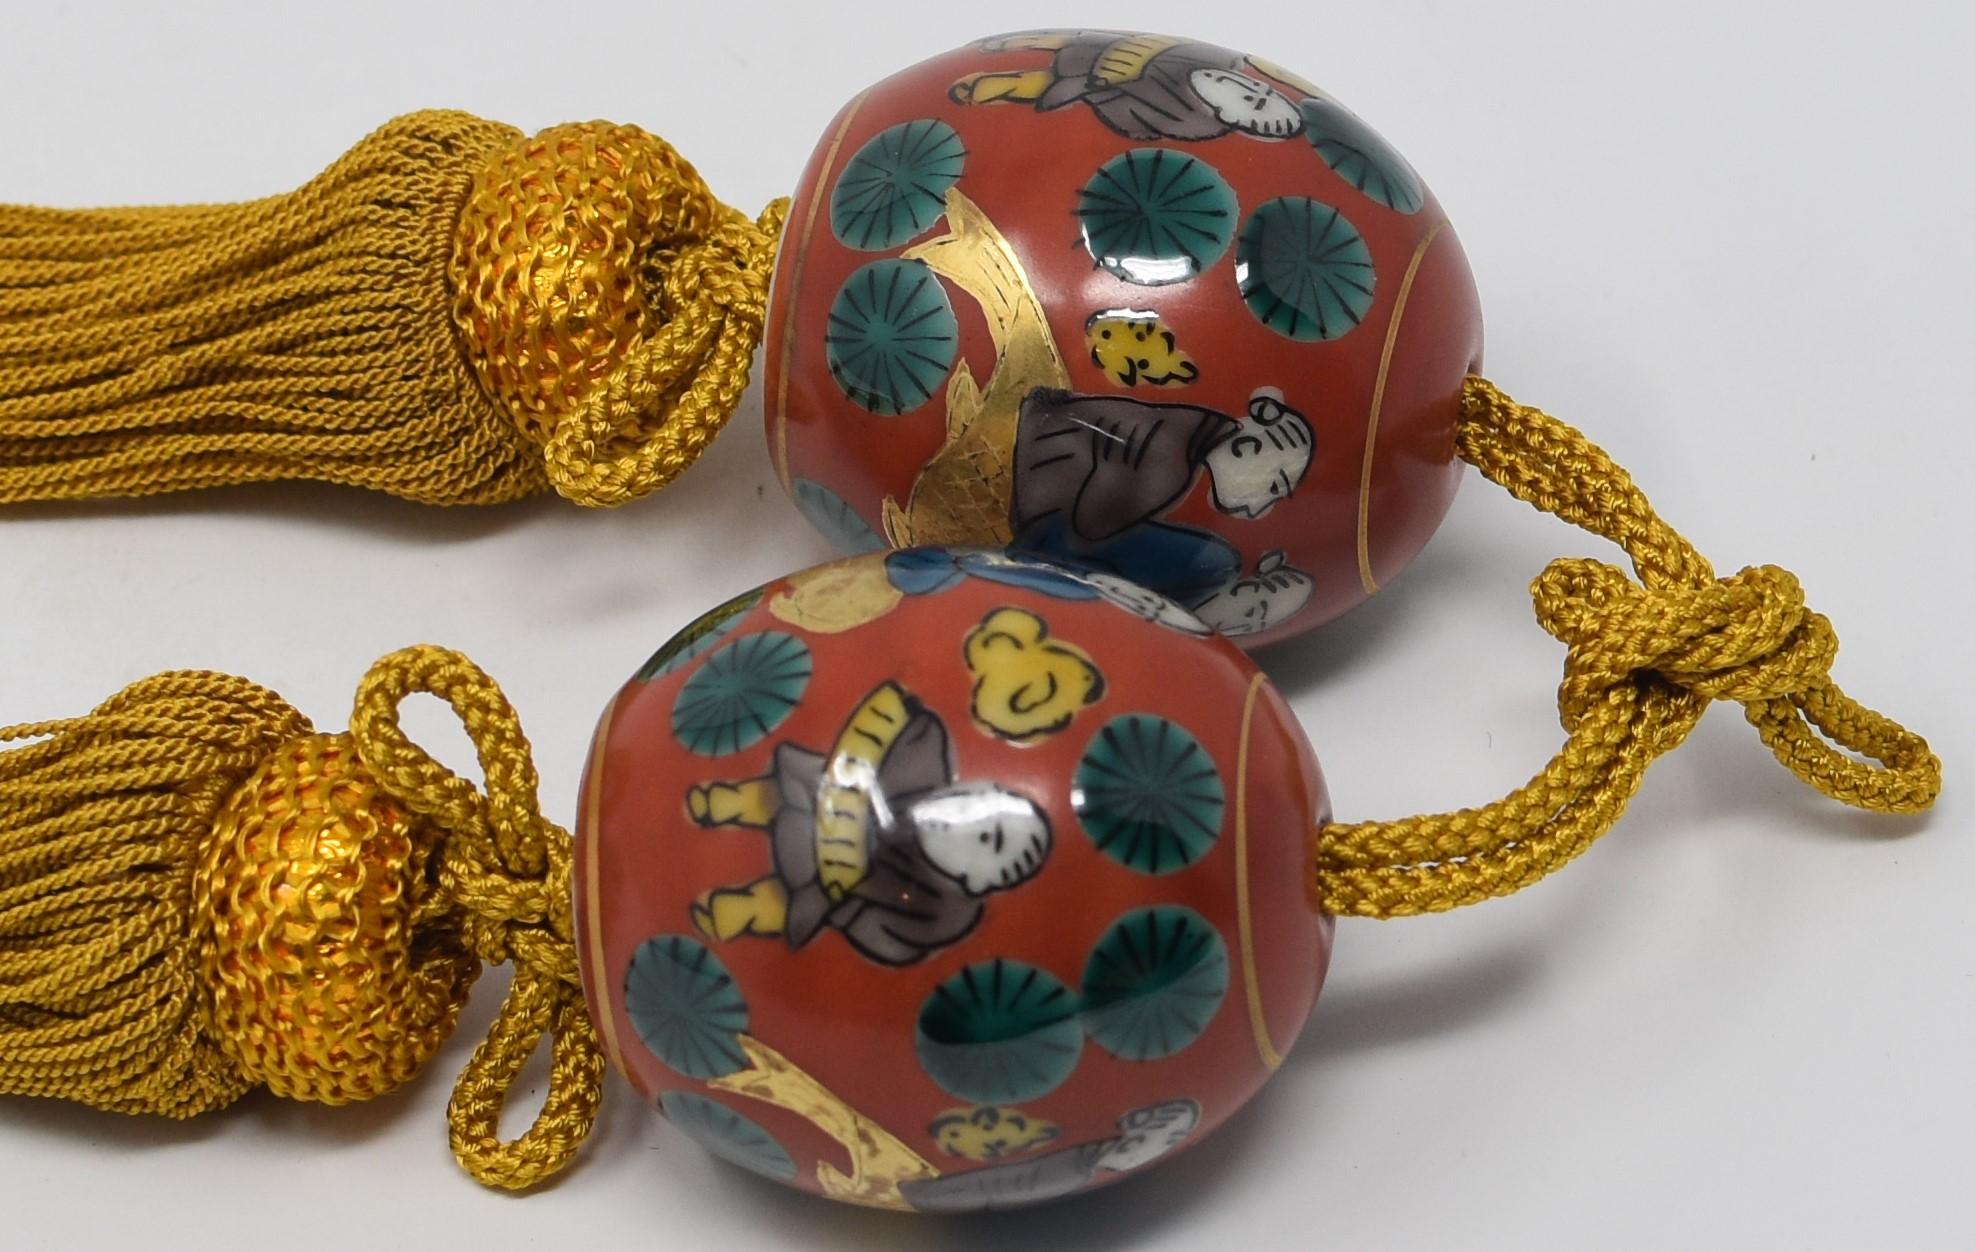 Attractive Japanese Kutani gilded contemporary pair of porcelain scroll weights (fuchin), extremely intricately hand painted in Mokube pattern, one of Kutani's most recognized and beloved patterns, in mokubei's signature red and green on a beautiful